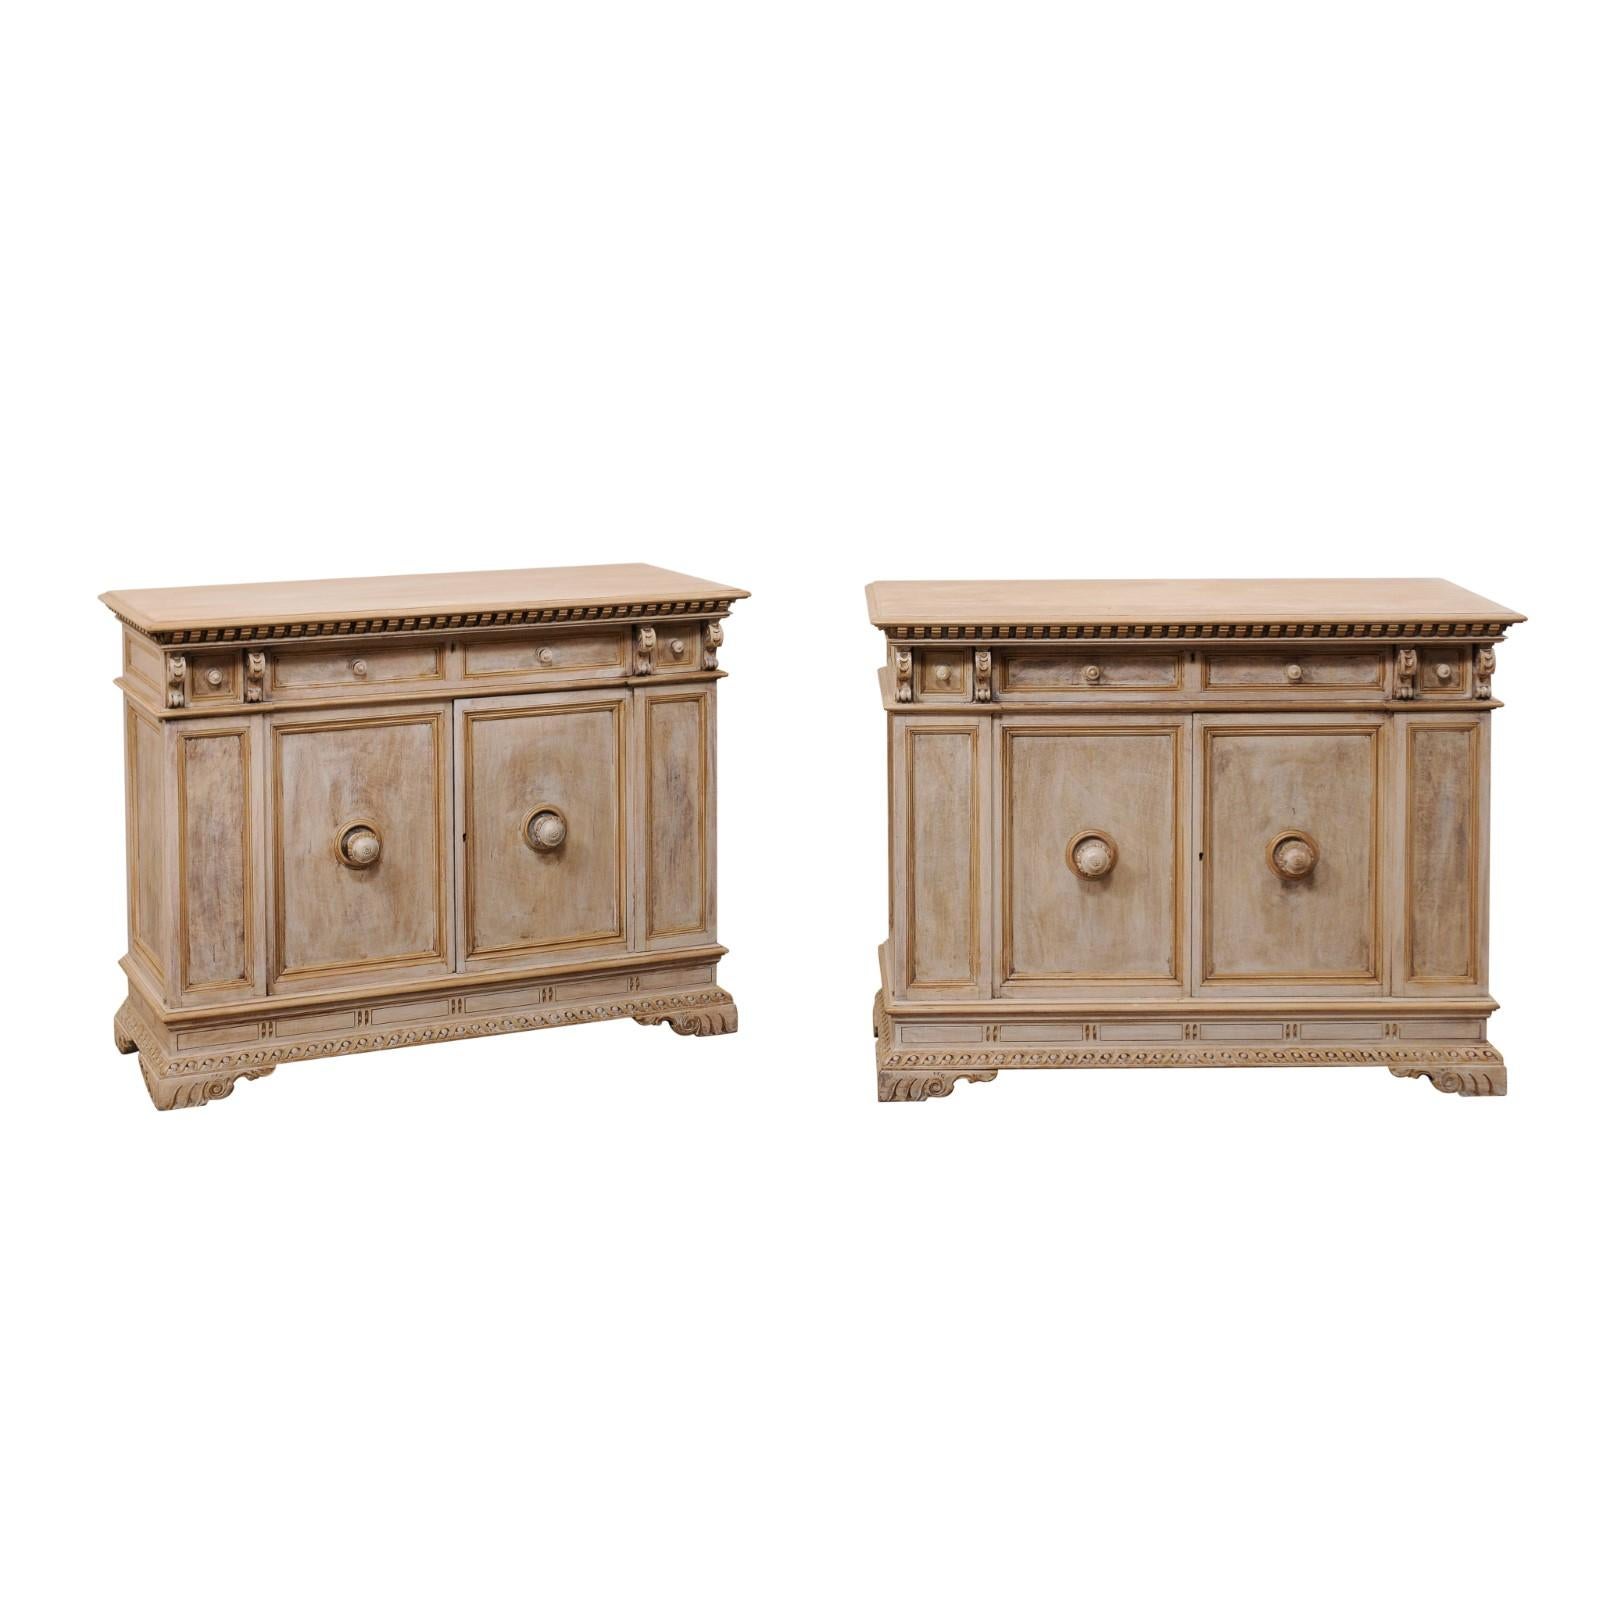 Pair of Italian-Style Early 20th Century Cabinets by Henry Fuldner and Sons